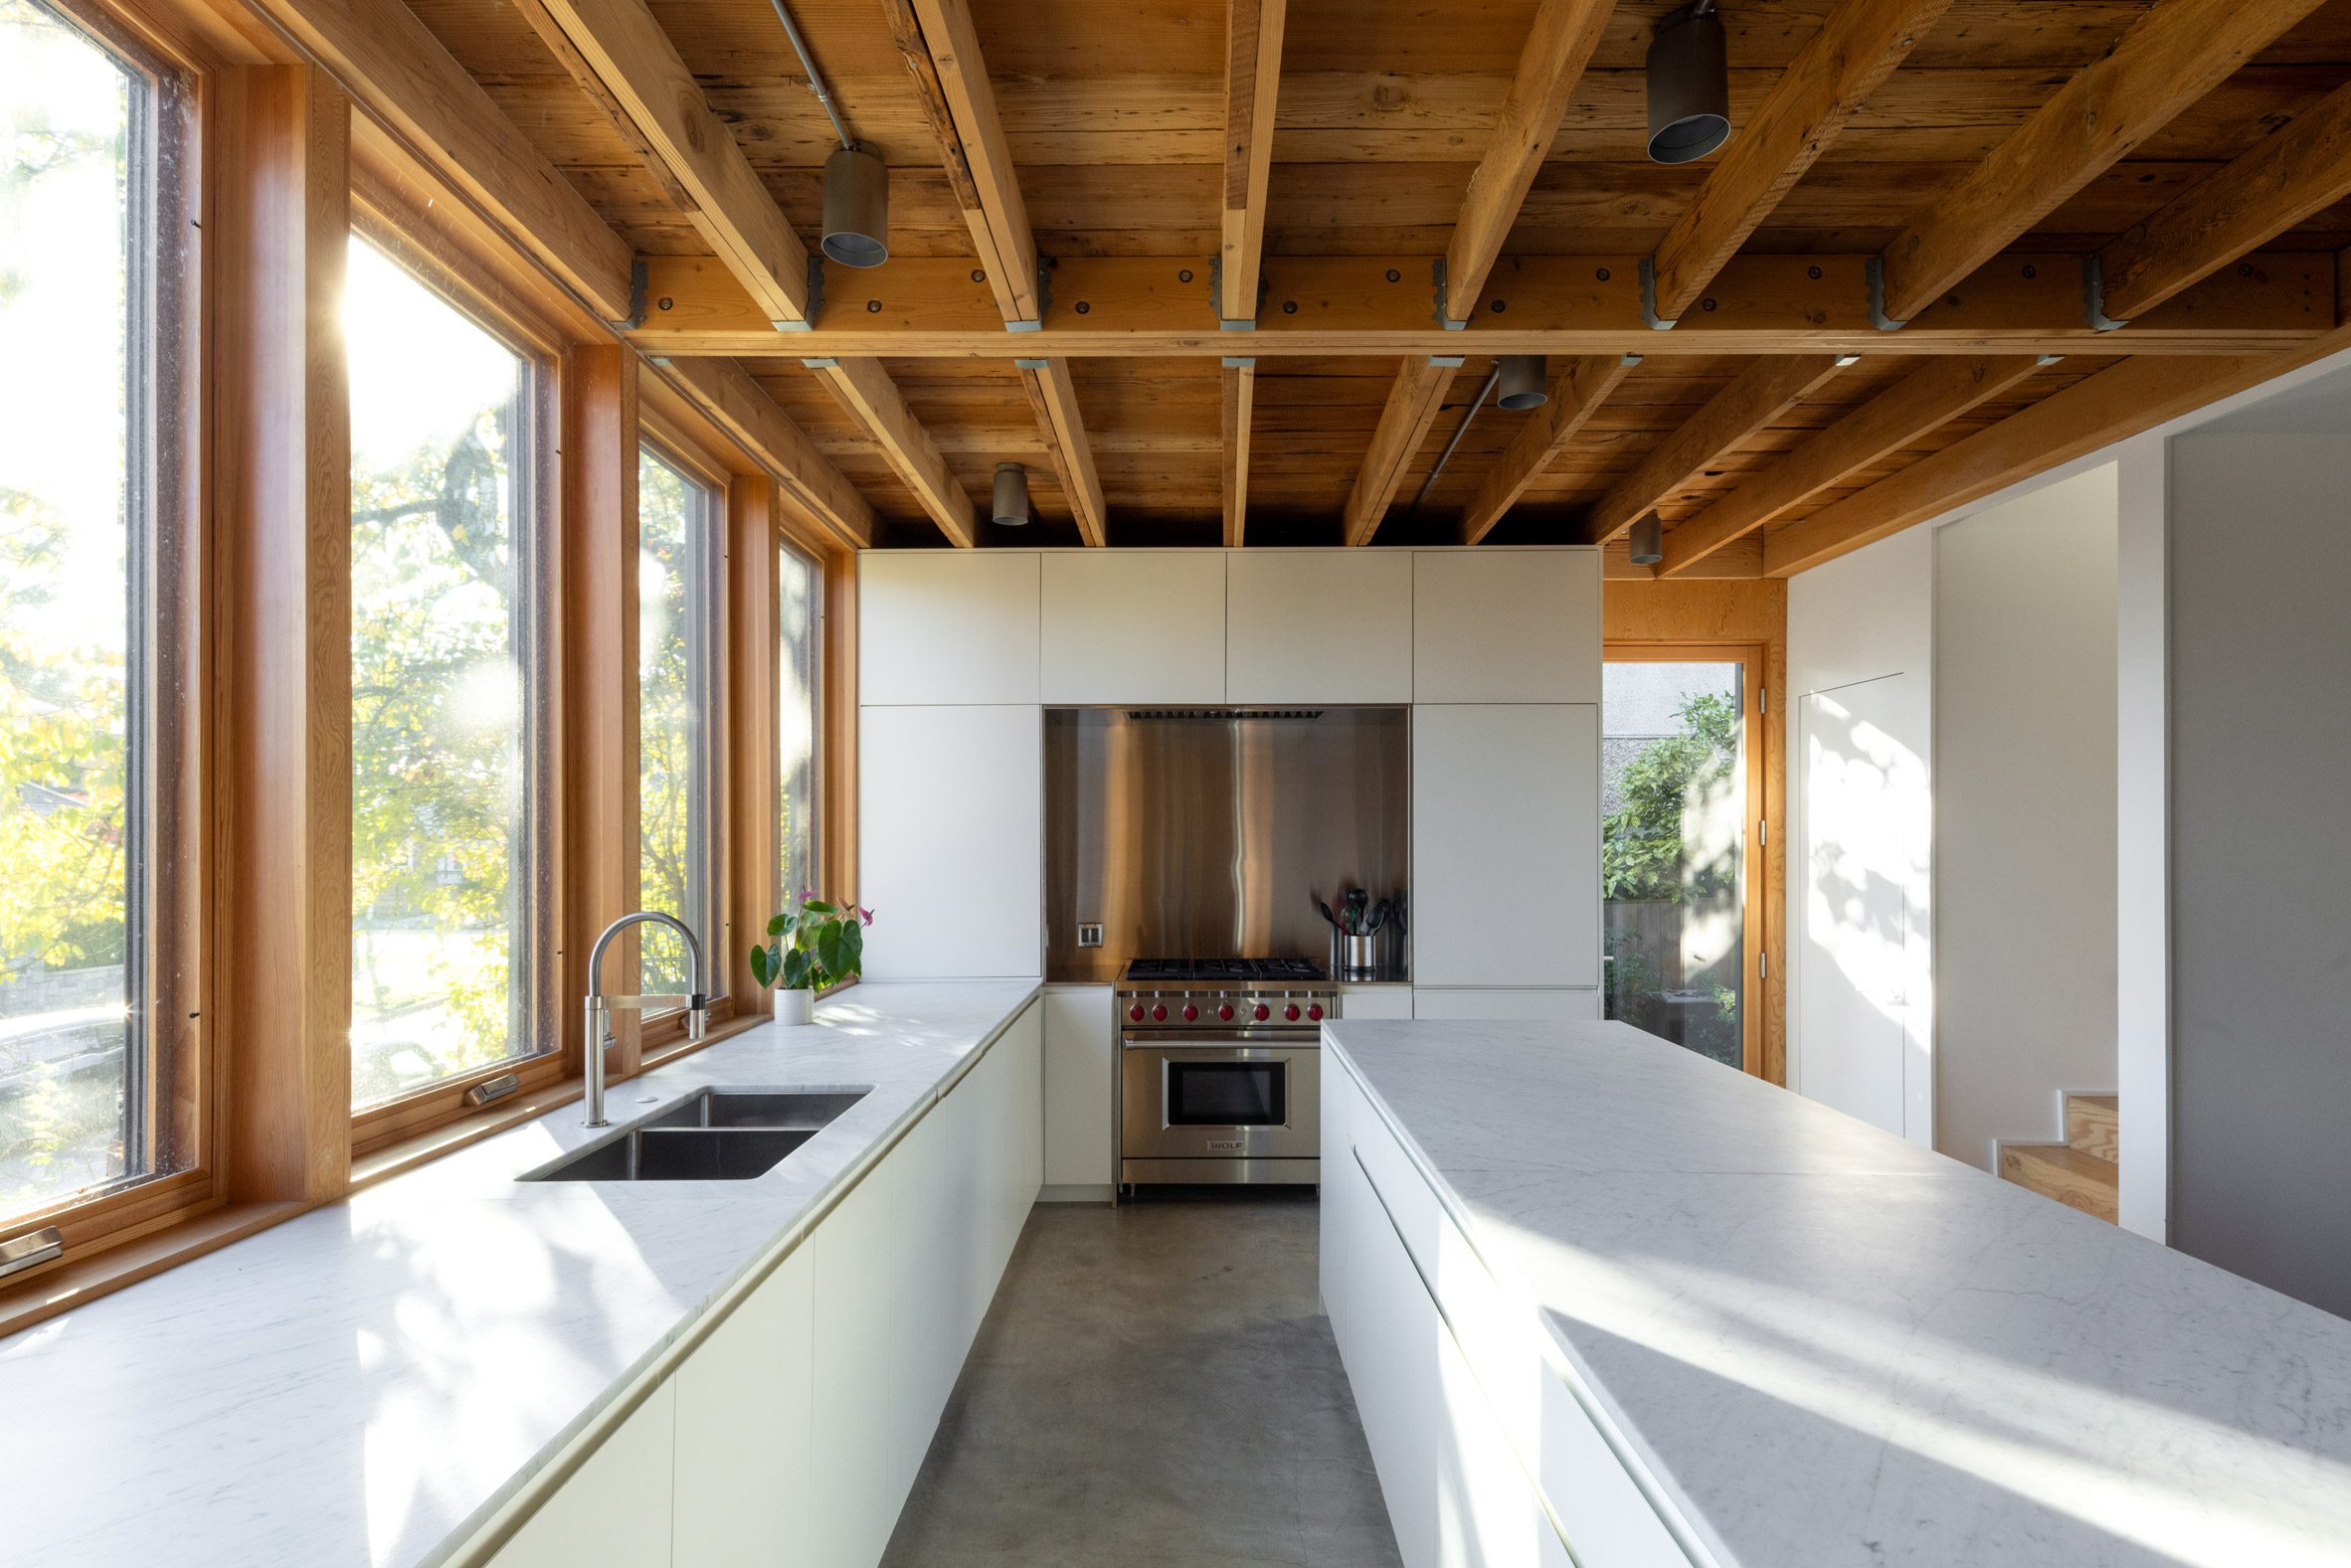 d’arcy jones adds subterranean garage to century-old house in vancouver